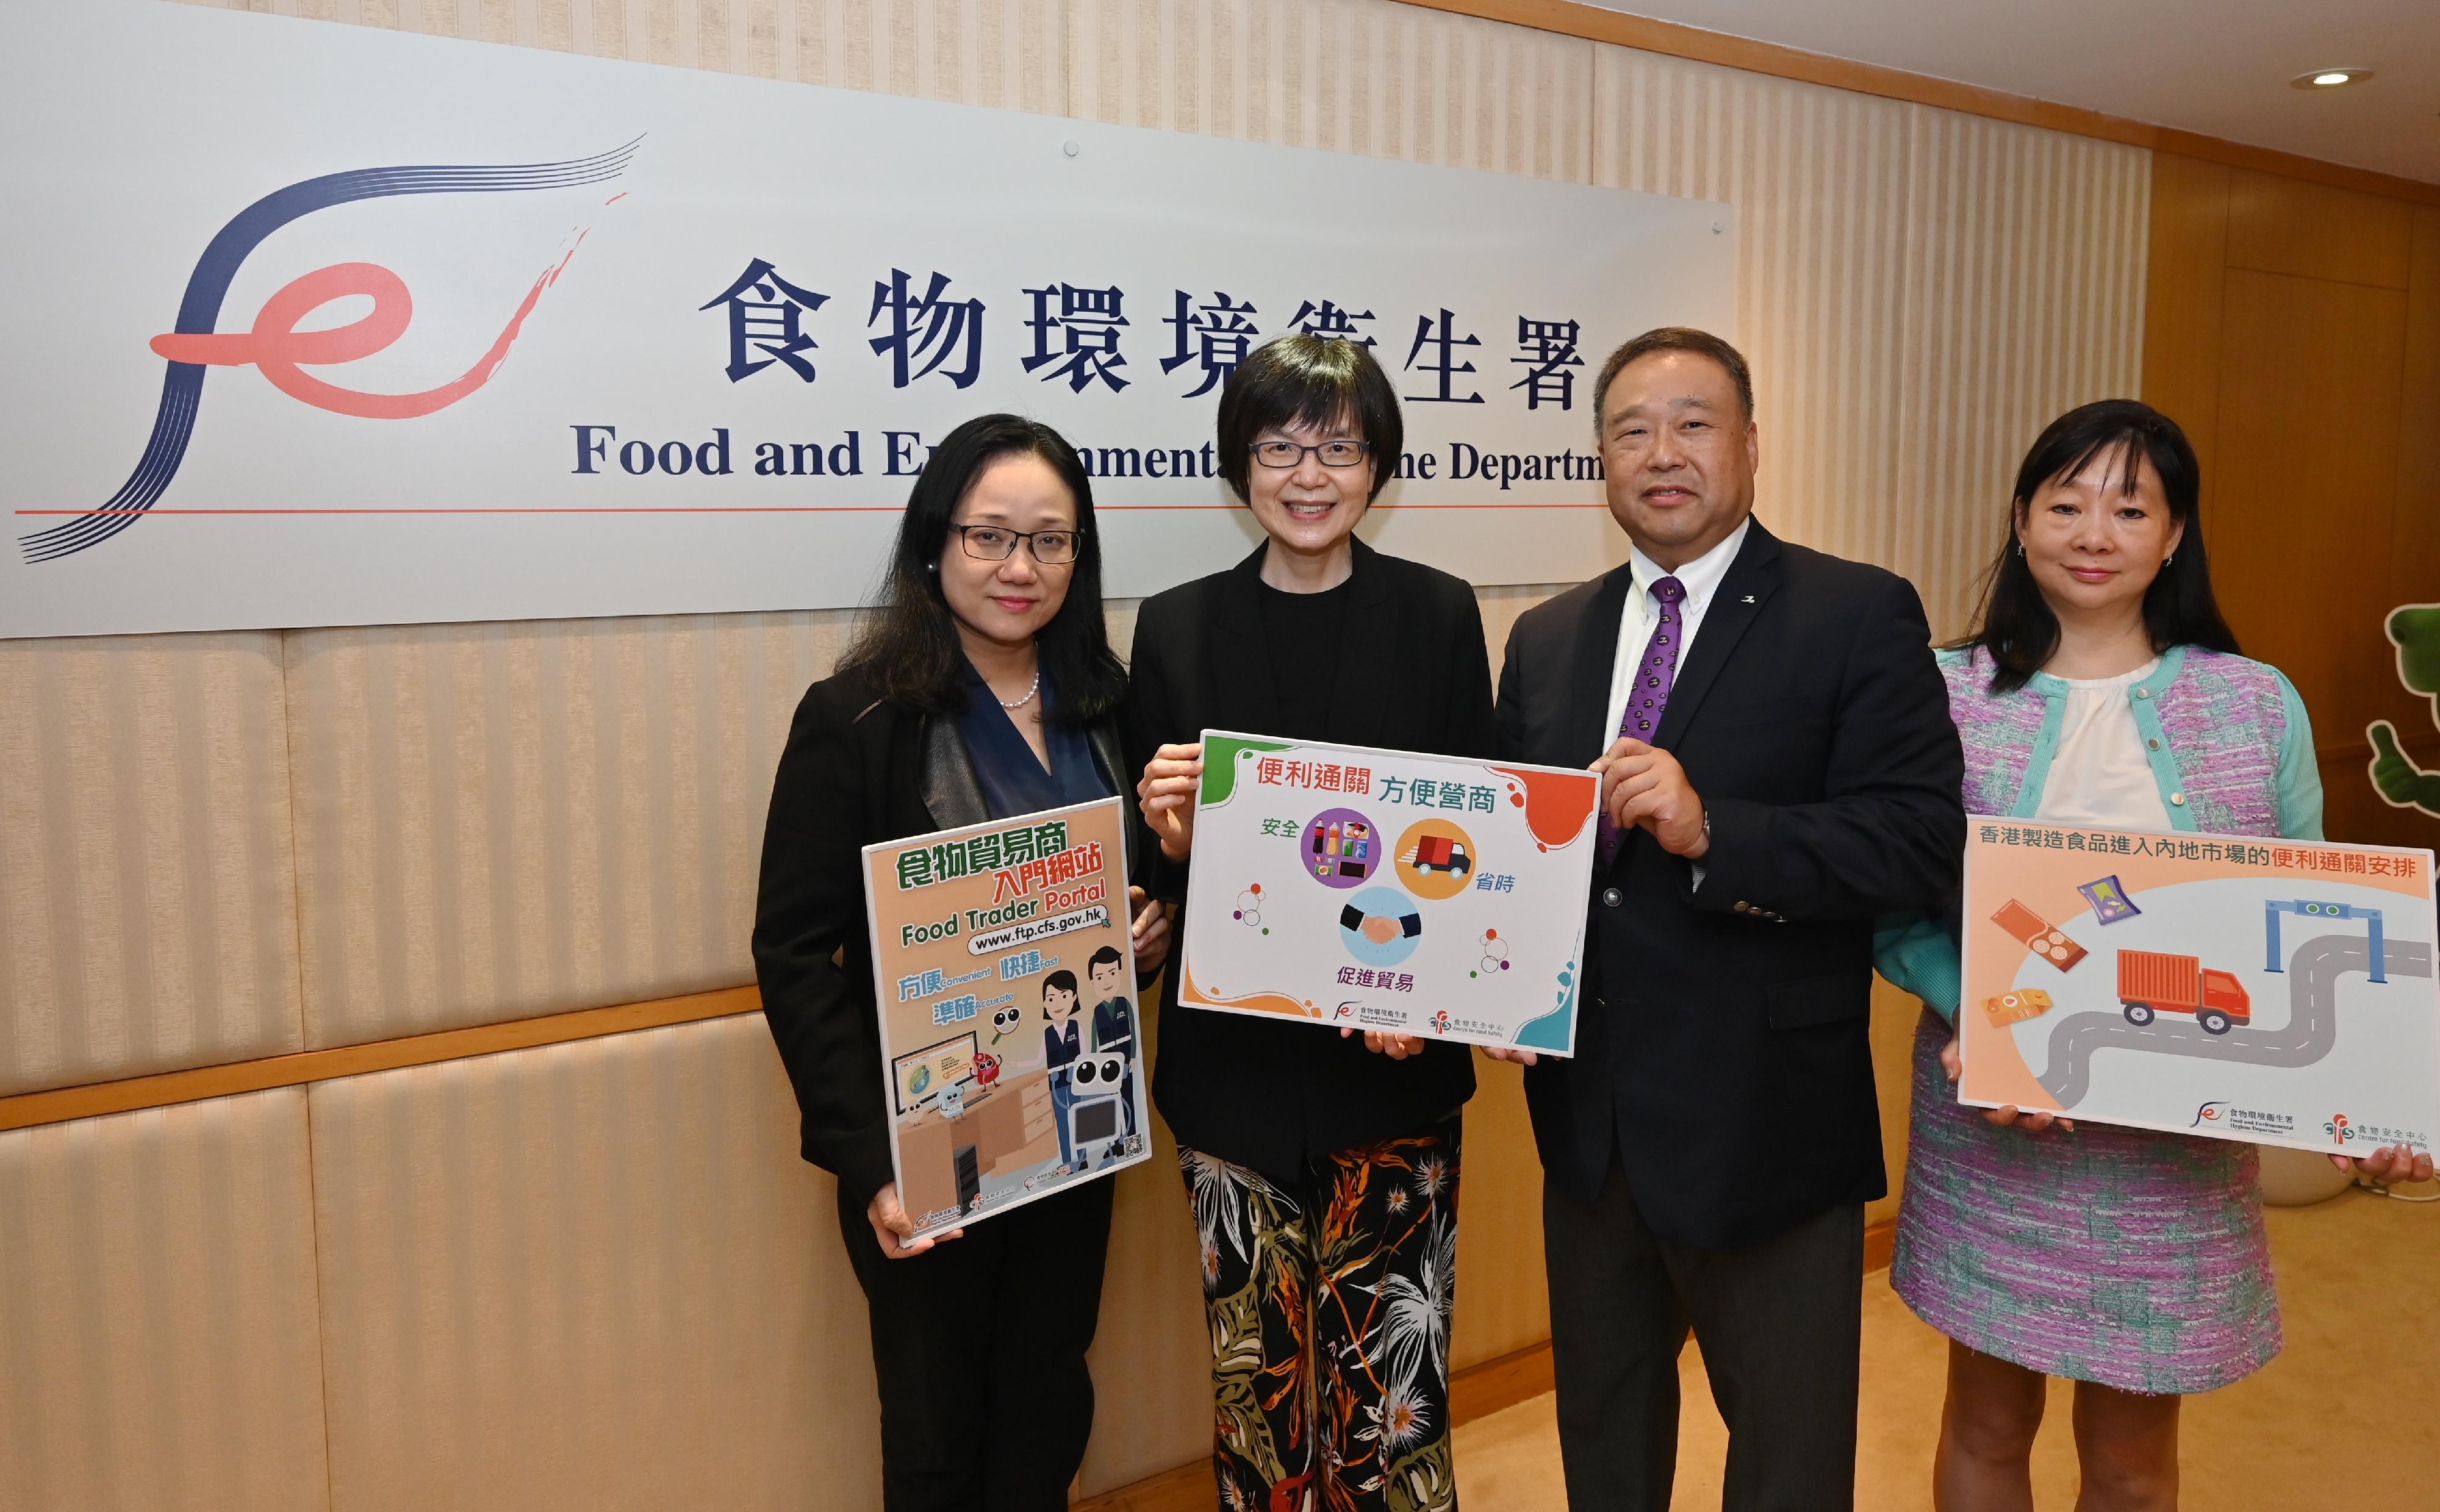 A spokesman for the Centre for Food Safety (CFS) of the Food and Environmental Hygiene Department stated today (May 7) that the new measure of the Cooperation Agreement on the Supervision of Safety and Facilitation of Customs Clearance of Food Products Manufactured in Hong Kong Exported to the Mainland will commence on May 21. Upon meeting specific requirements, Hong Kong-manufactured food products with satisfactory on-site inspection of the Mainland Customs that are still required to go through sampling and testing can be released upon completion of sampling without waiting for the results. The CFS has arranged briefings on details of the new measure for the local food trade. Photo shows the Permanent Secretary for Environment and Ecology (Food), Miss Vivian Lau (second left); the Controller of the CFS, Dr Christine Wong (first left); Executive Deputy Chairman of the Federation of Hong Kong Industries (FHKI) Mr Anthony Lam (second right); and the Director-General of the FHKI, Ms Bonnie Chan (first right), at a briefing.